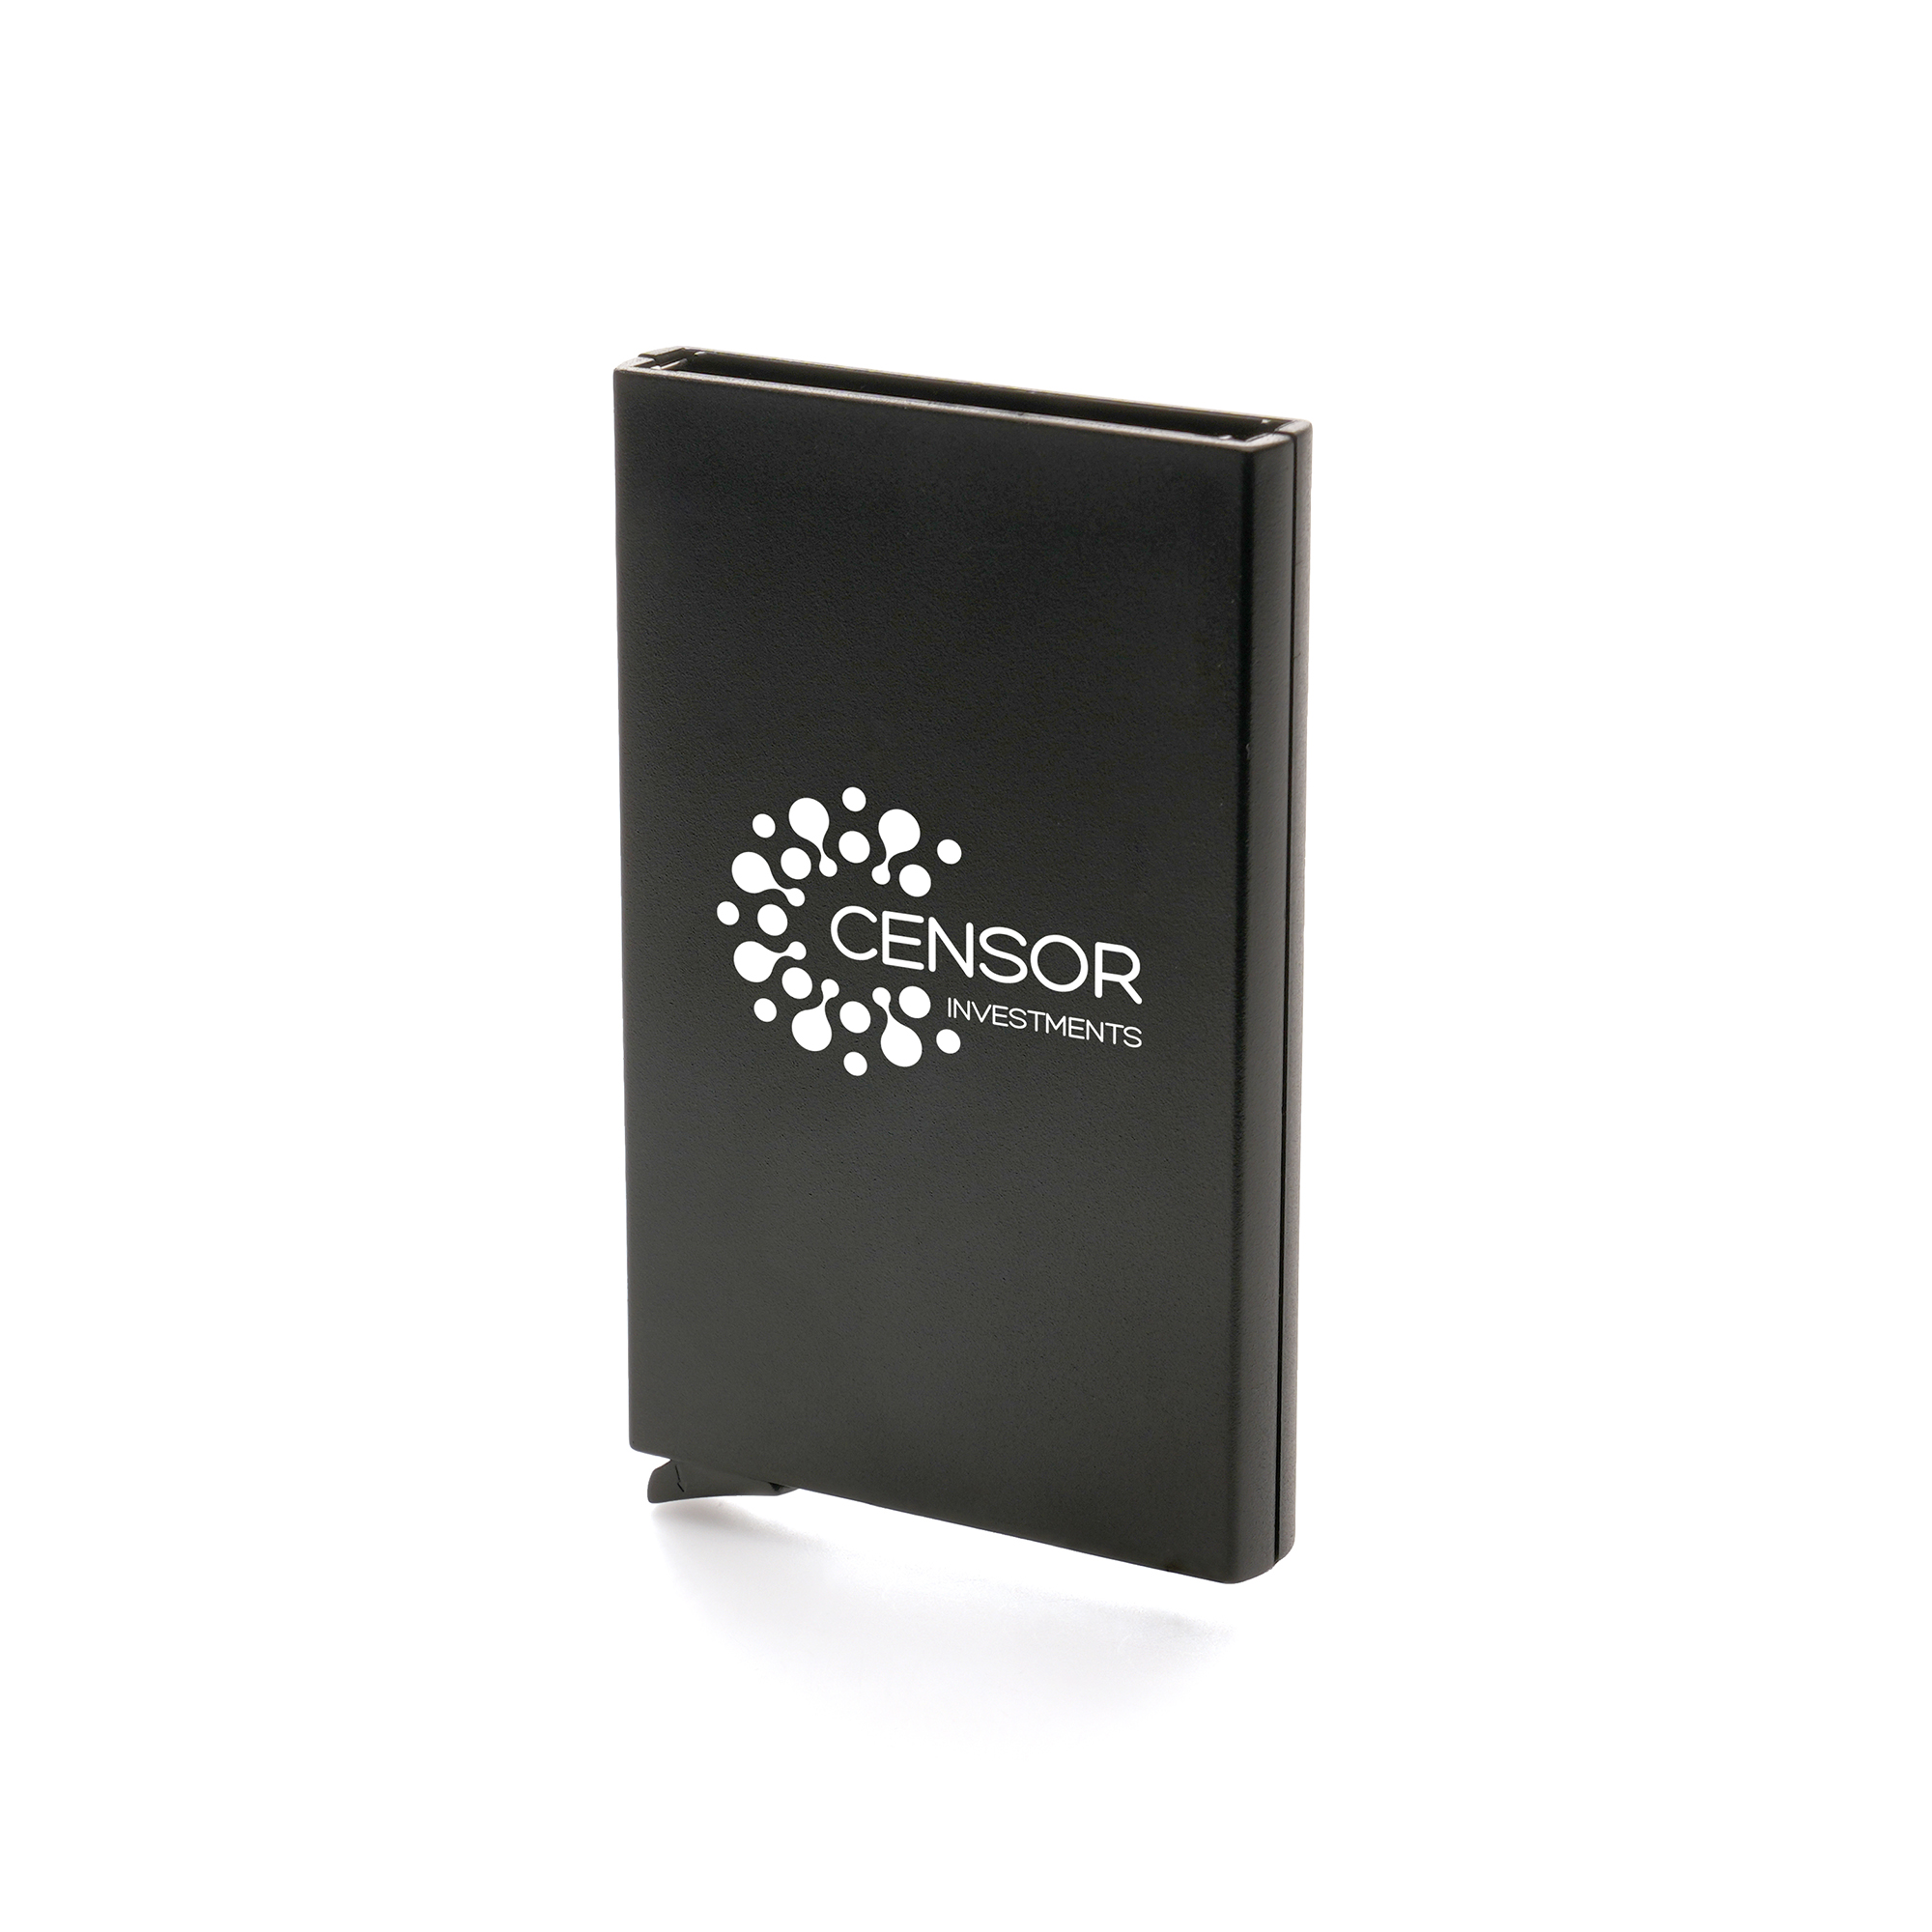 Made from recycled plastic this Radio Frequency Identification (RFID) card holder is designed to protect your card details and personal information with advanced technology.